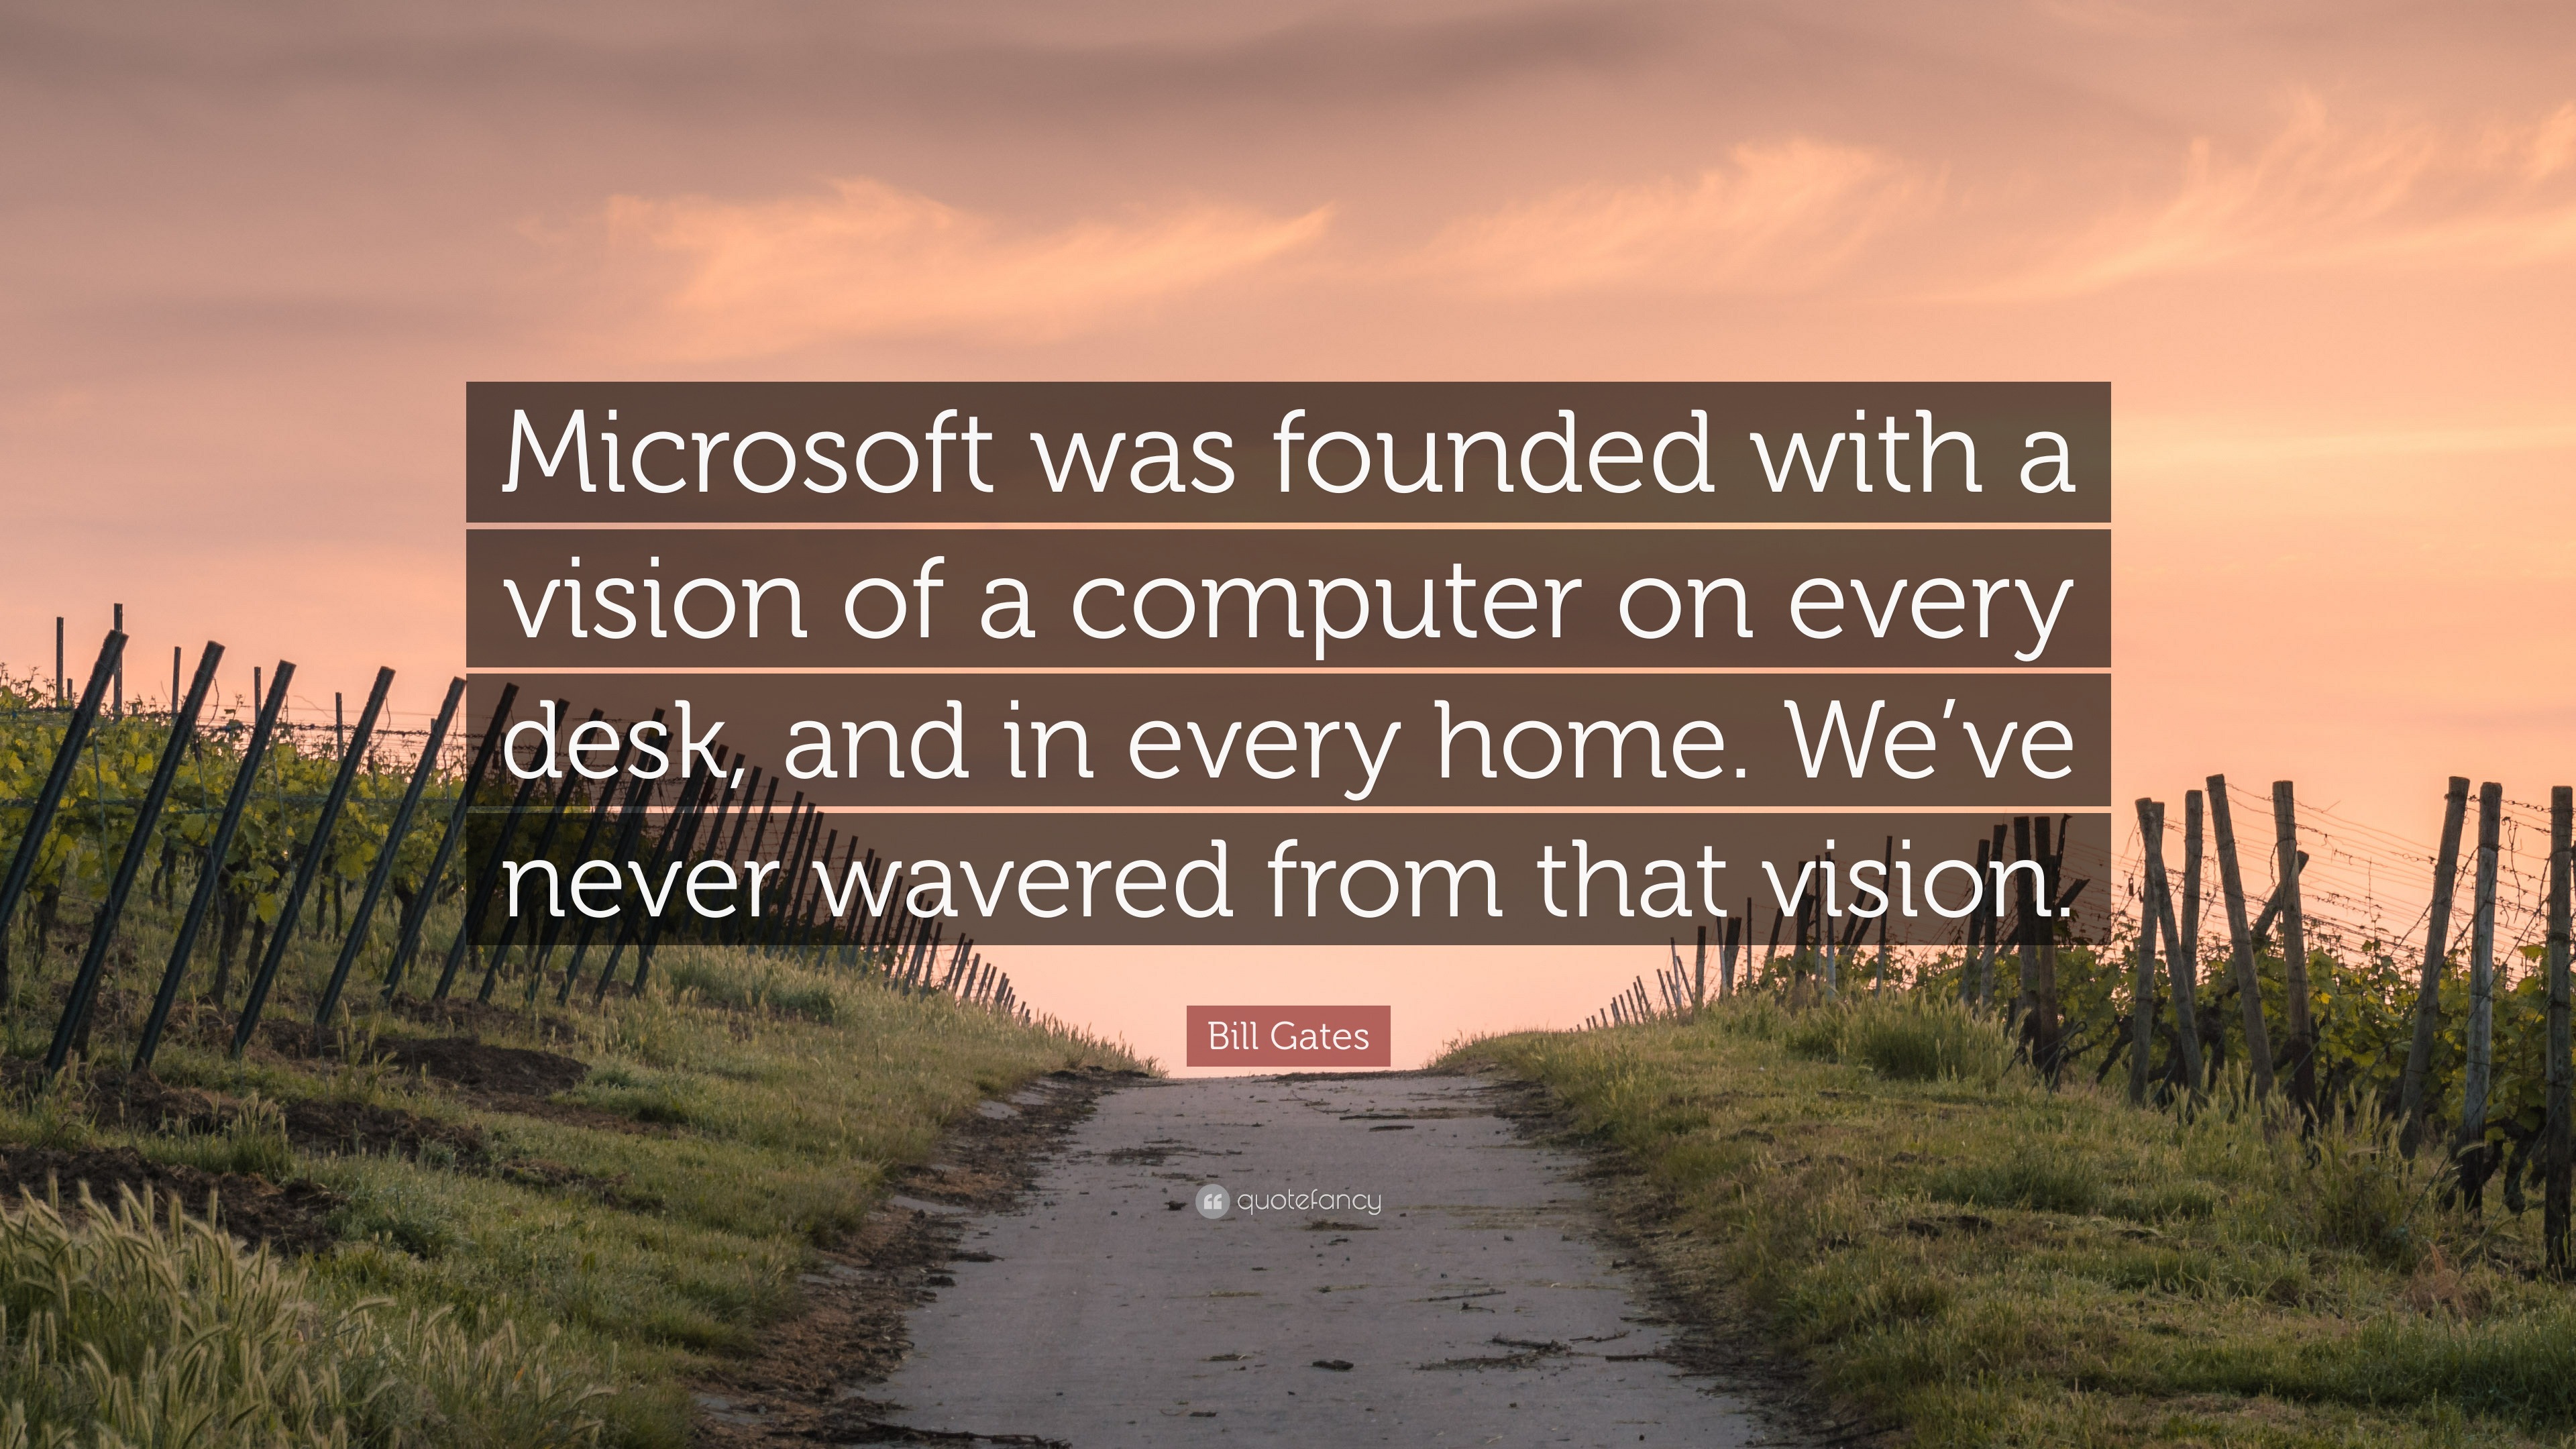 Bill Gates Quote: “Microsoft was founded with a vision of a computer on ...